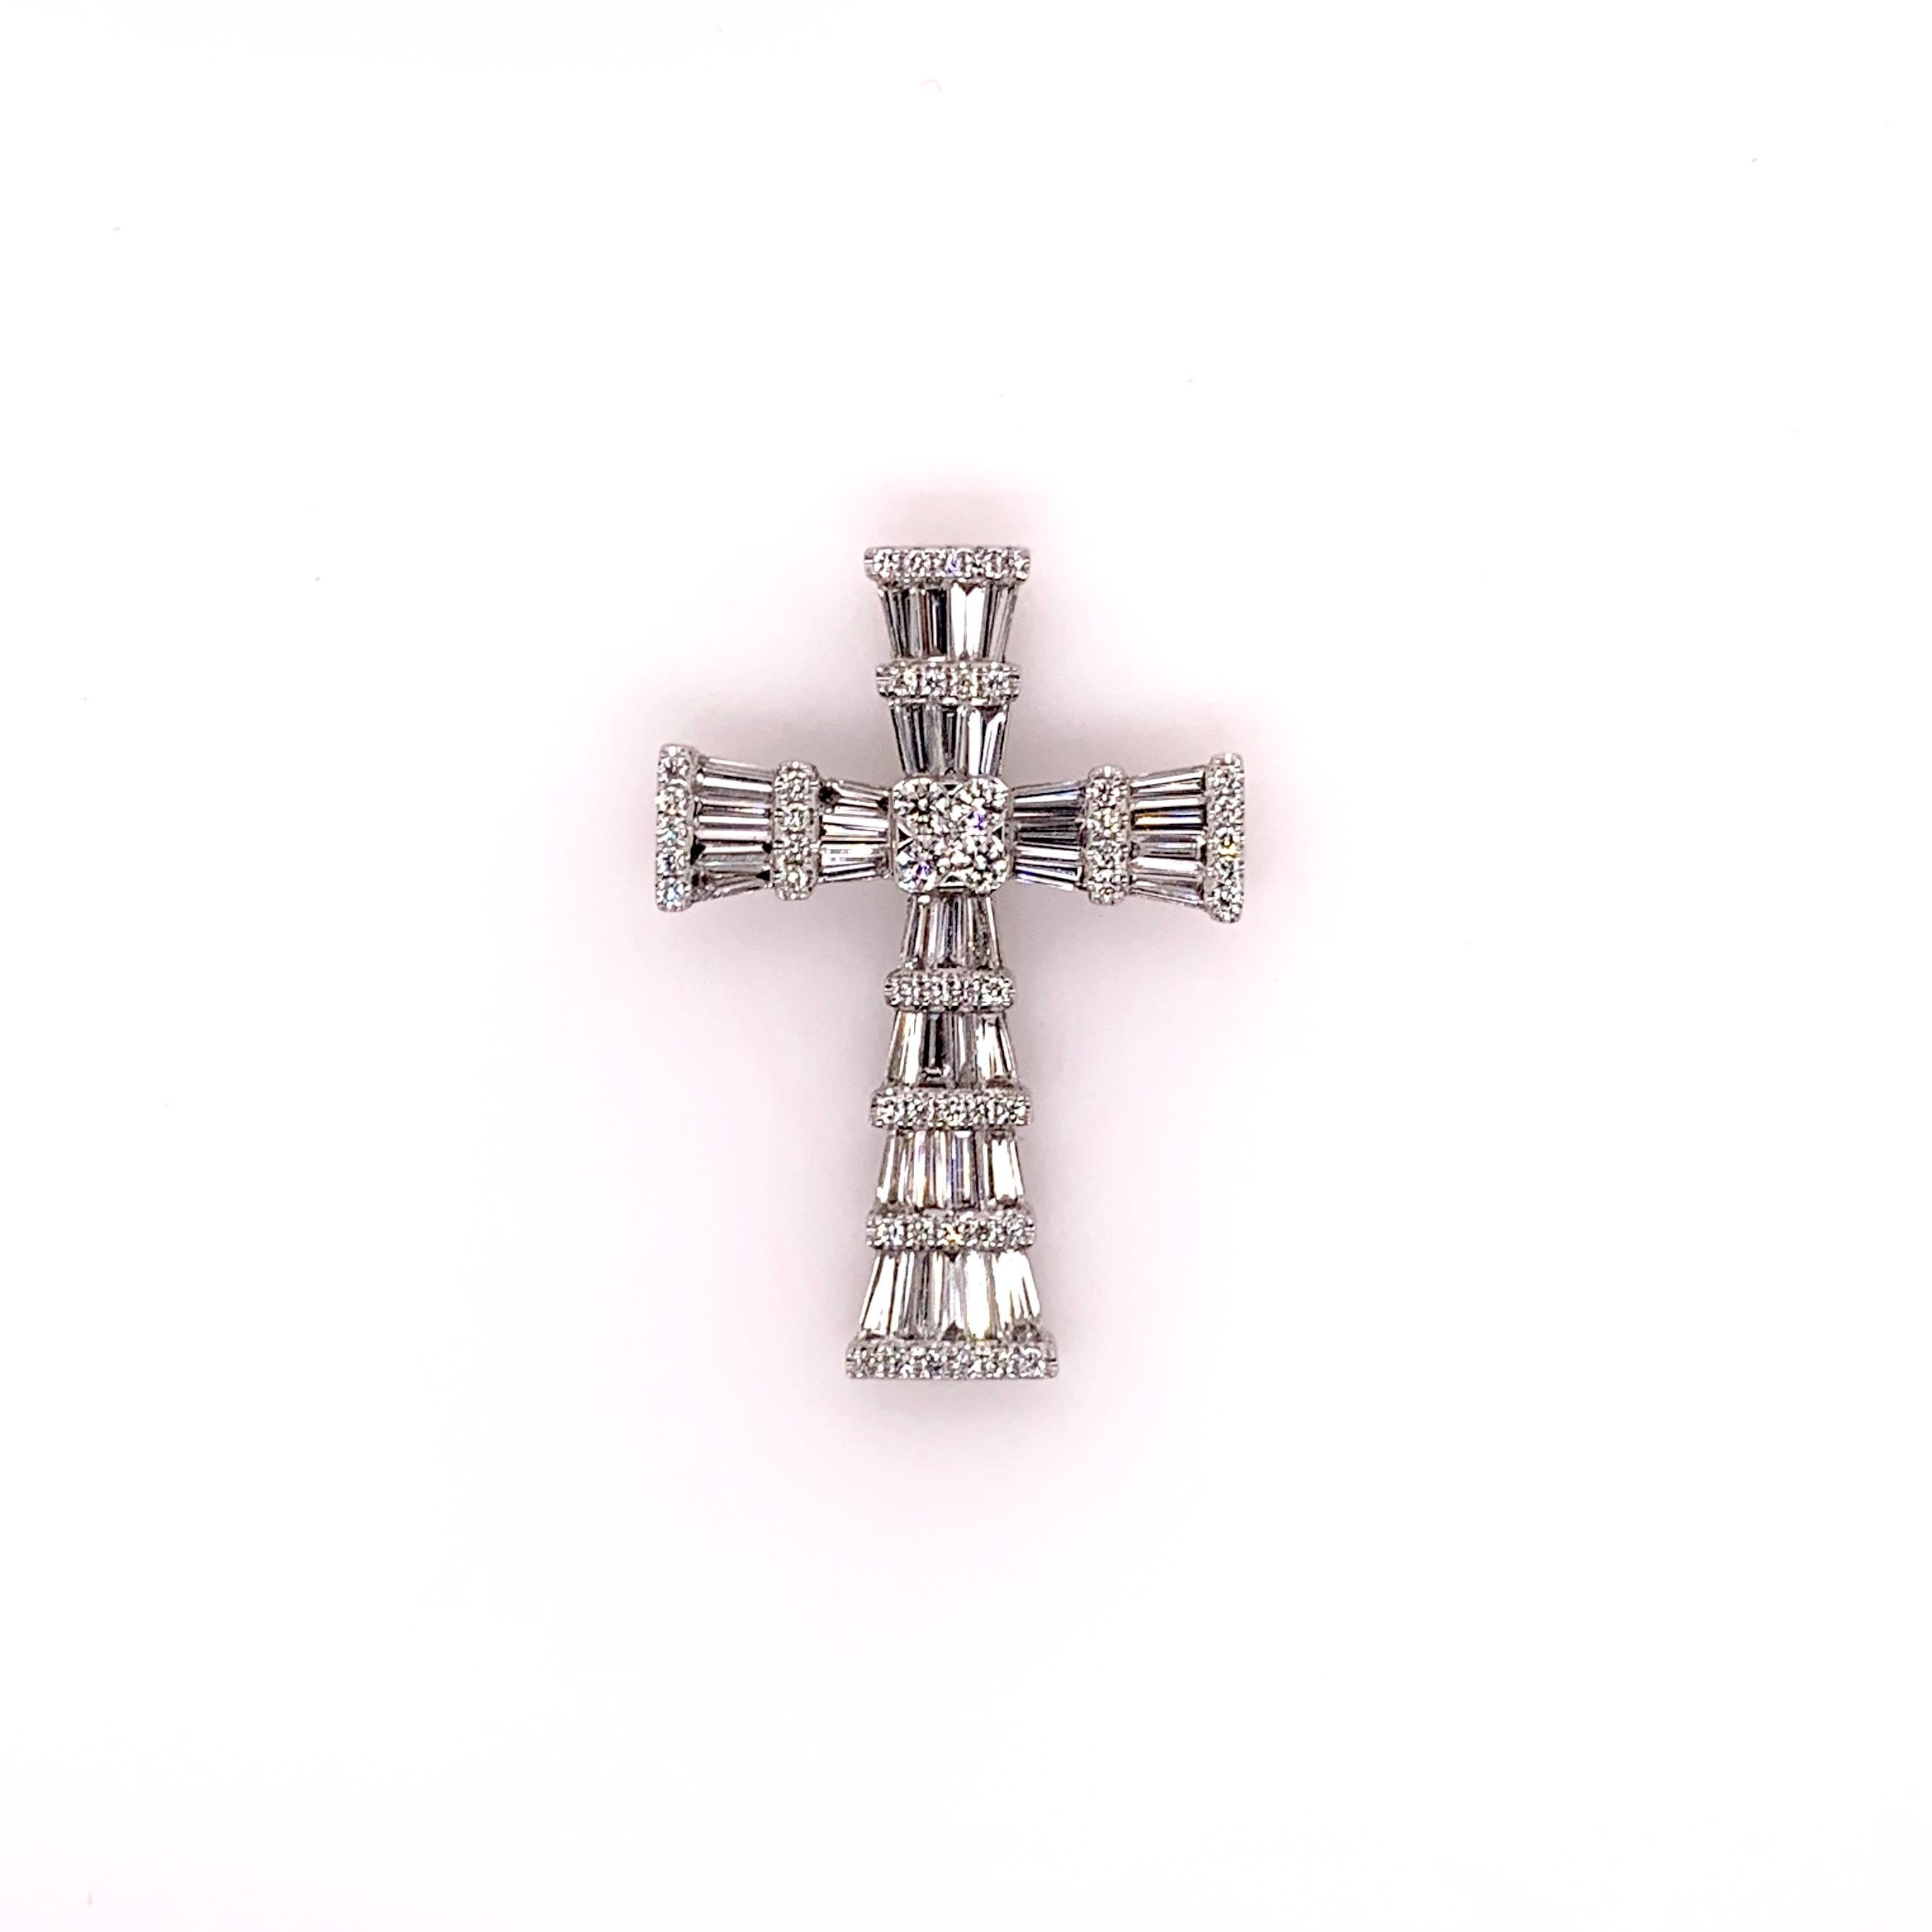 18k white gold, custom made diamond baguette cross with round brilliant accents will truly be an exquisite addition to anyones jewelry collection.  The fine details are exemplified in the graduated arms with the tapered baguettes.  The generous size